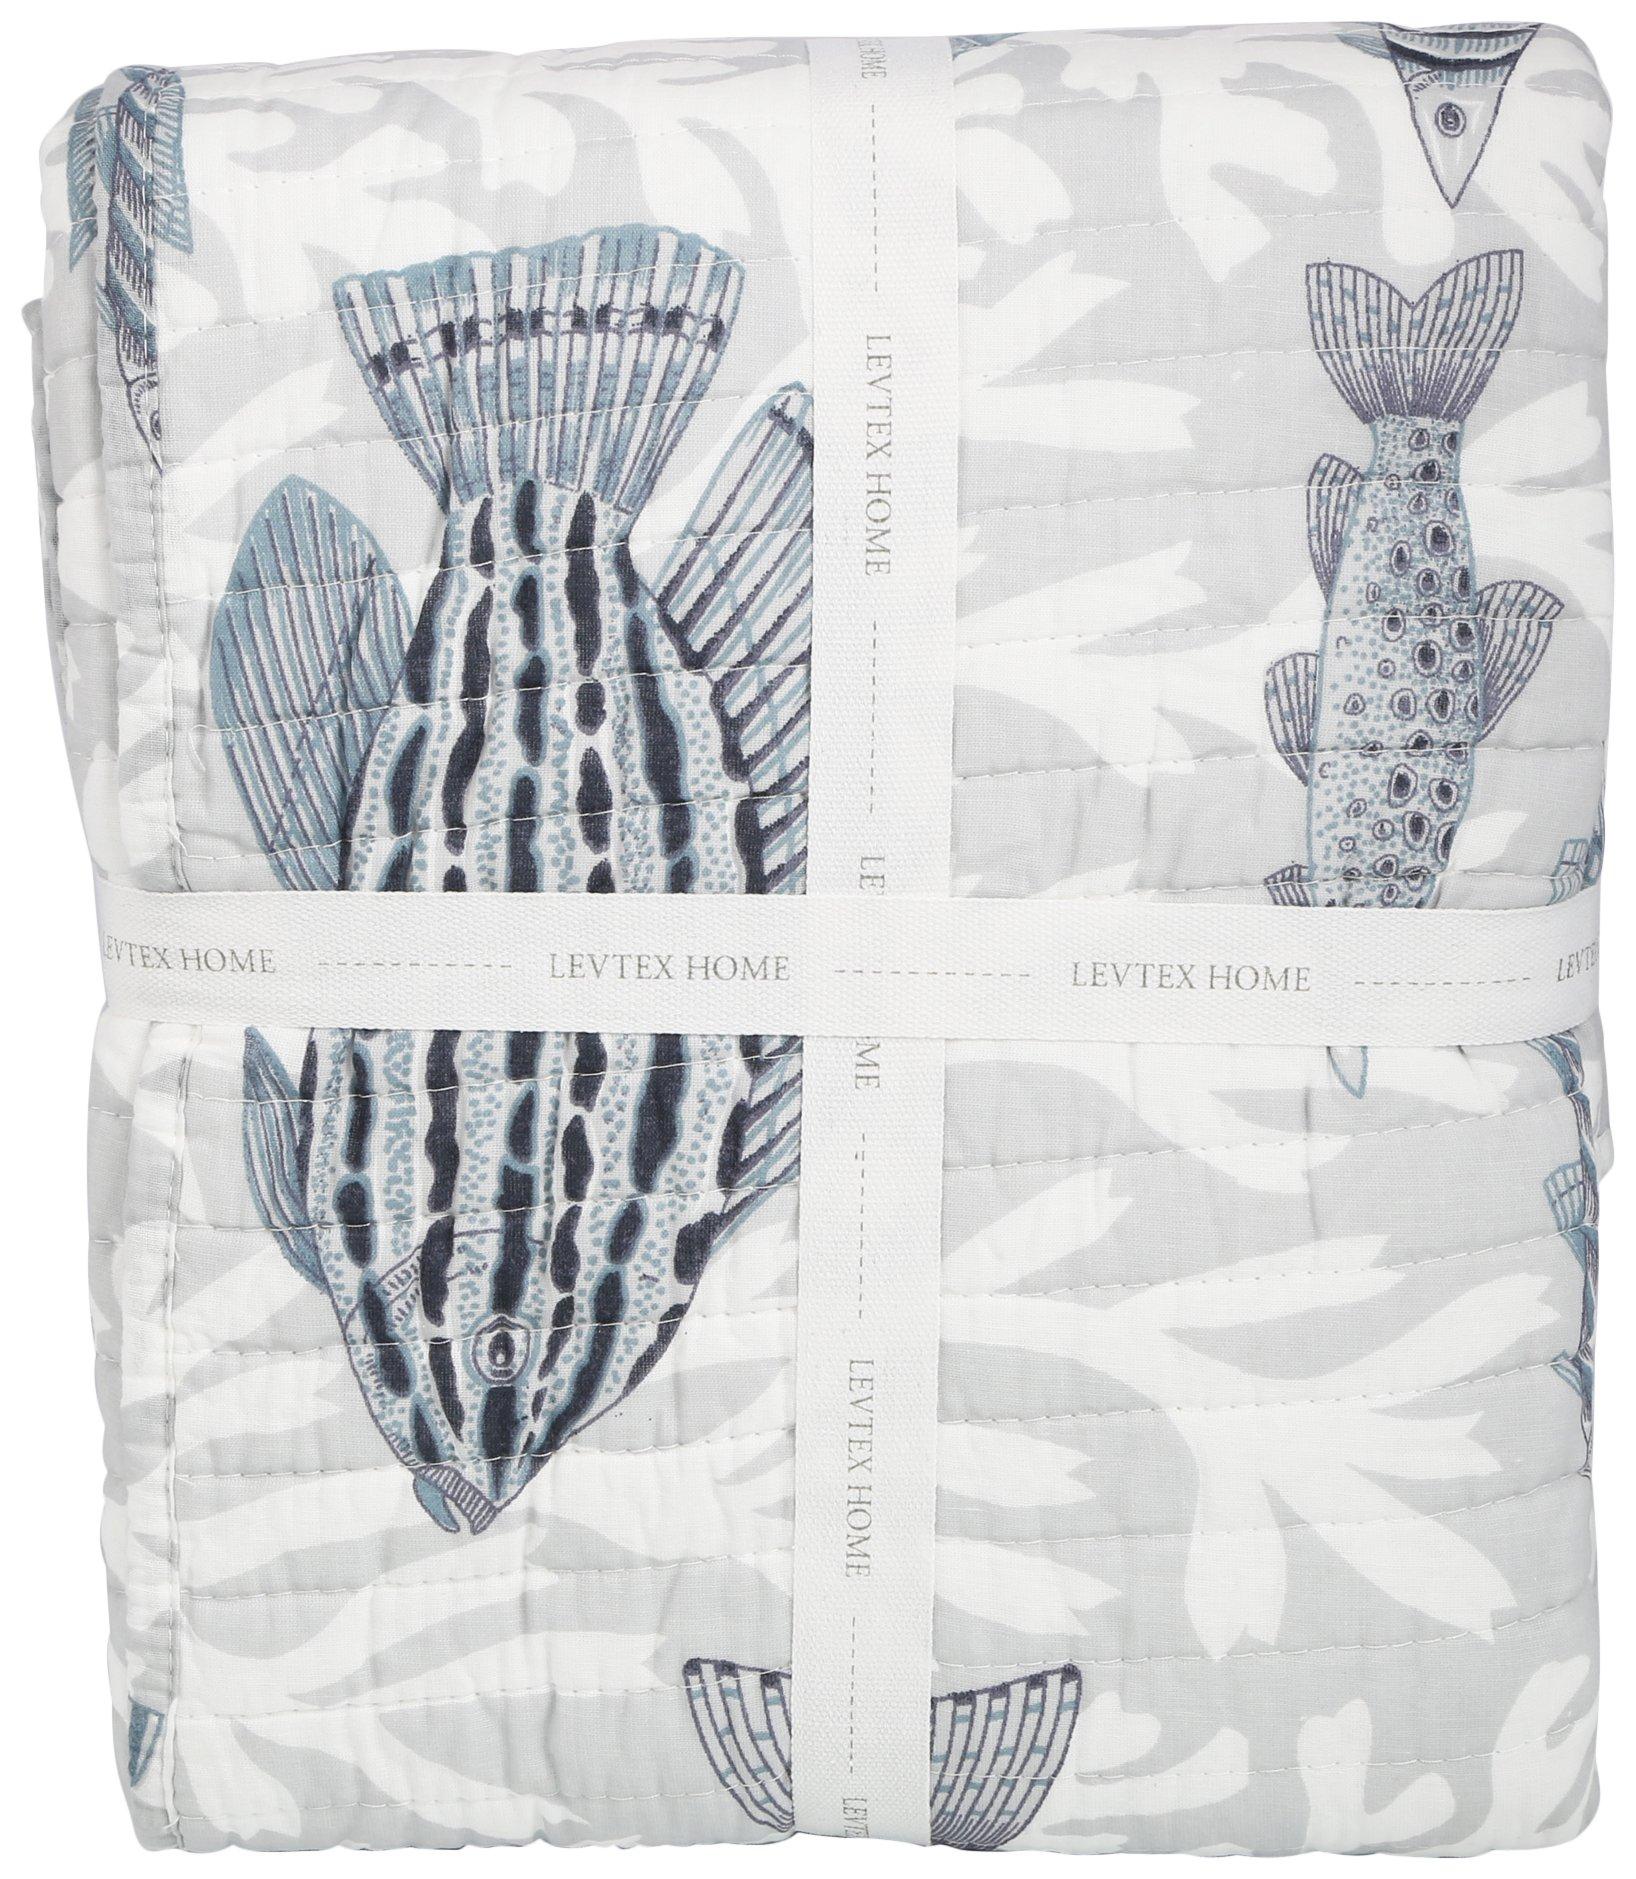 Levtex Home 50x60 Fish Print Quilted Throw Blanket